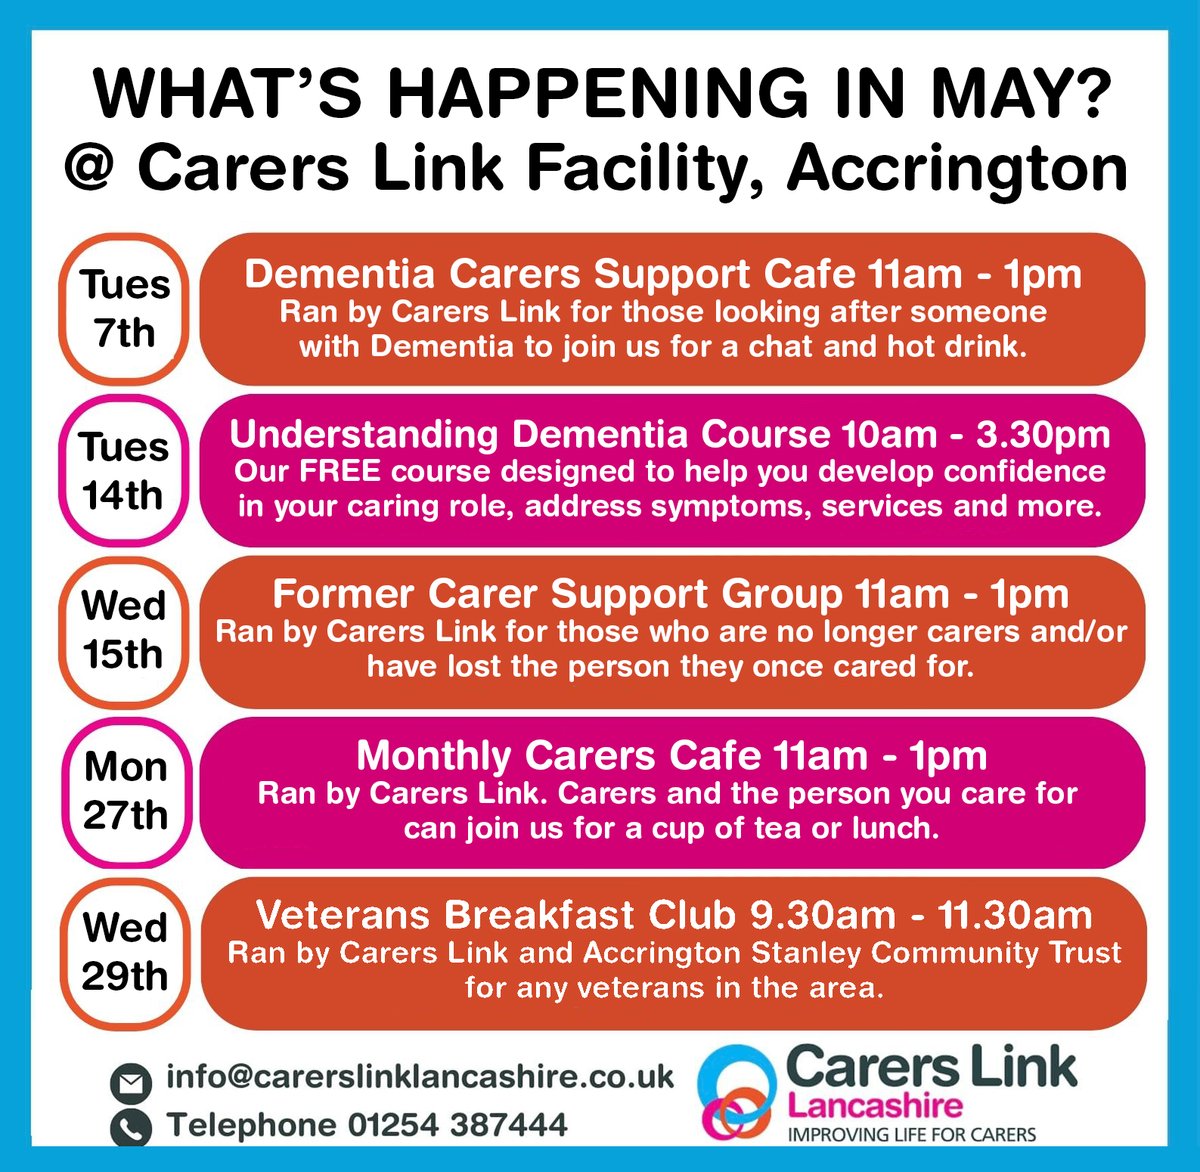 What's coming up in May at our Accrington 54/56 - Carers Link Lancashire's Community Facility ⬇⬇